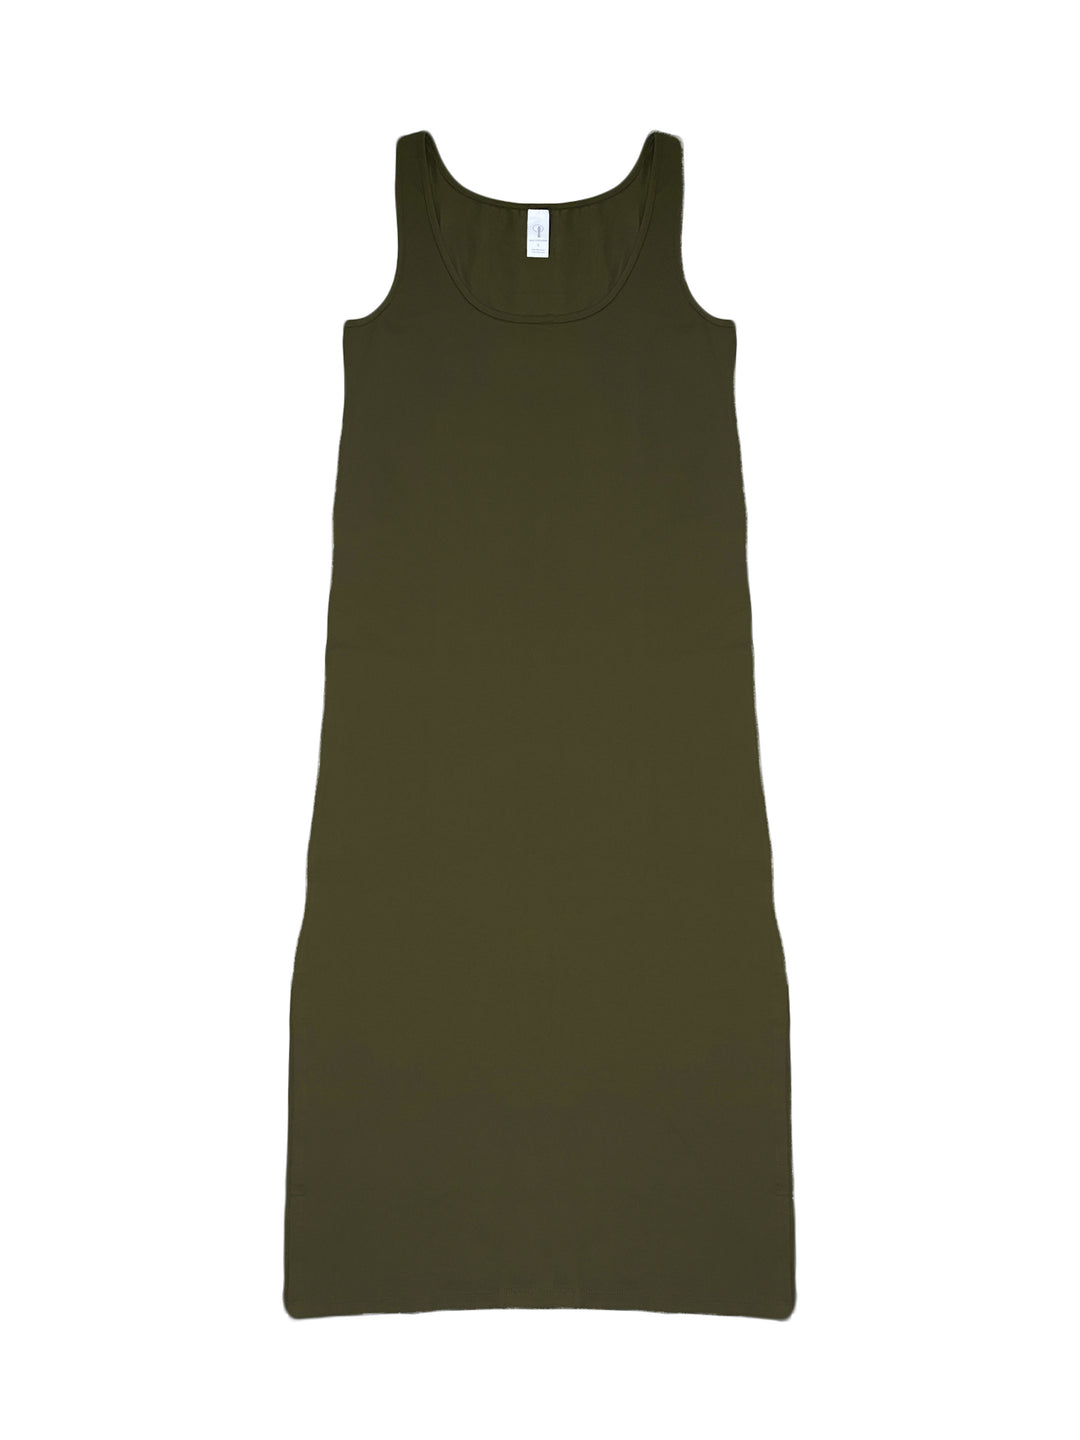 stretch tank dress in bamboo in olive colour